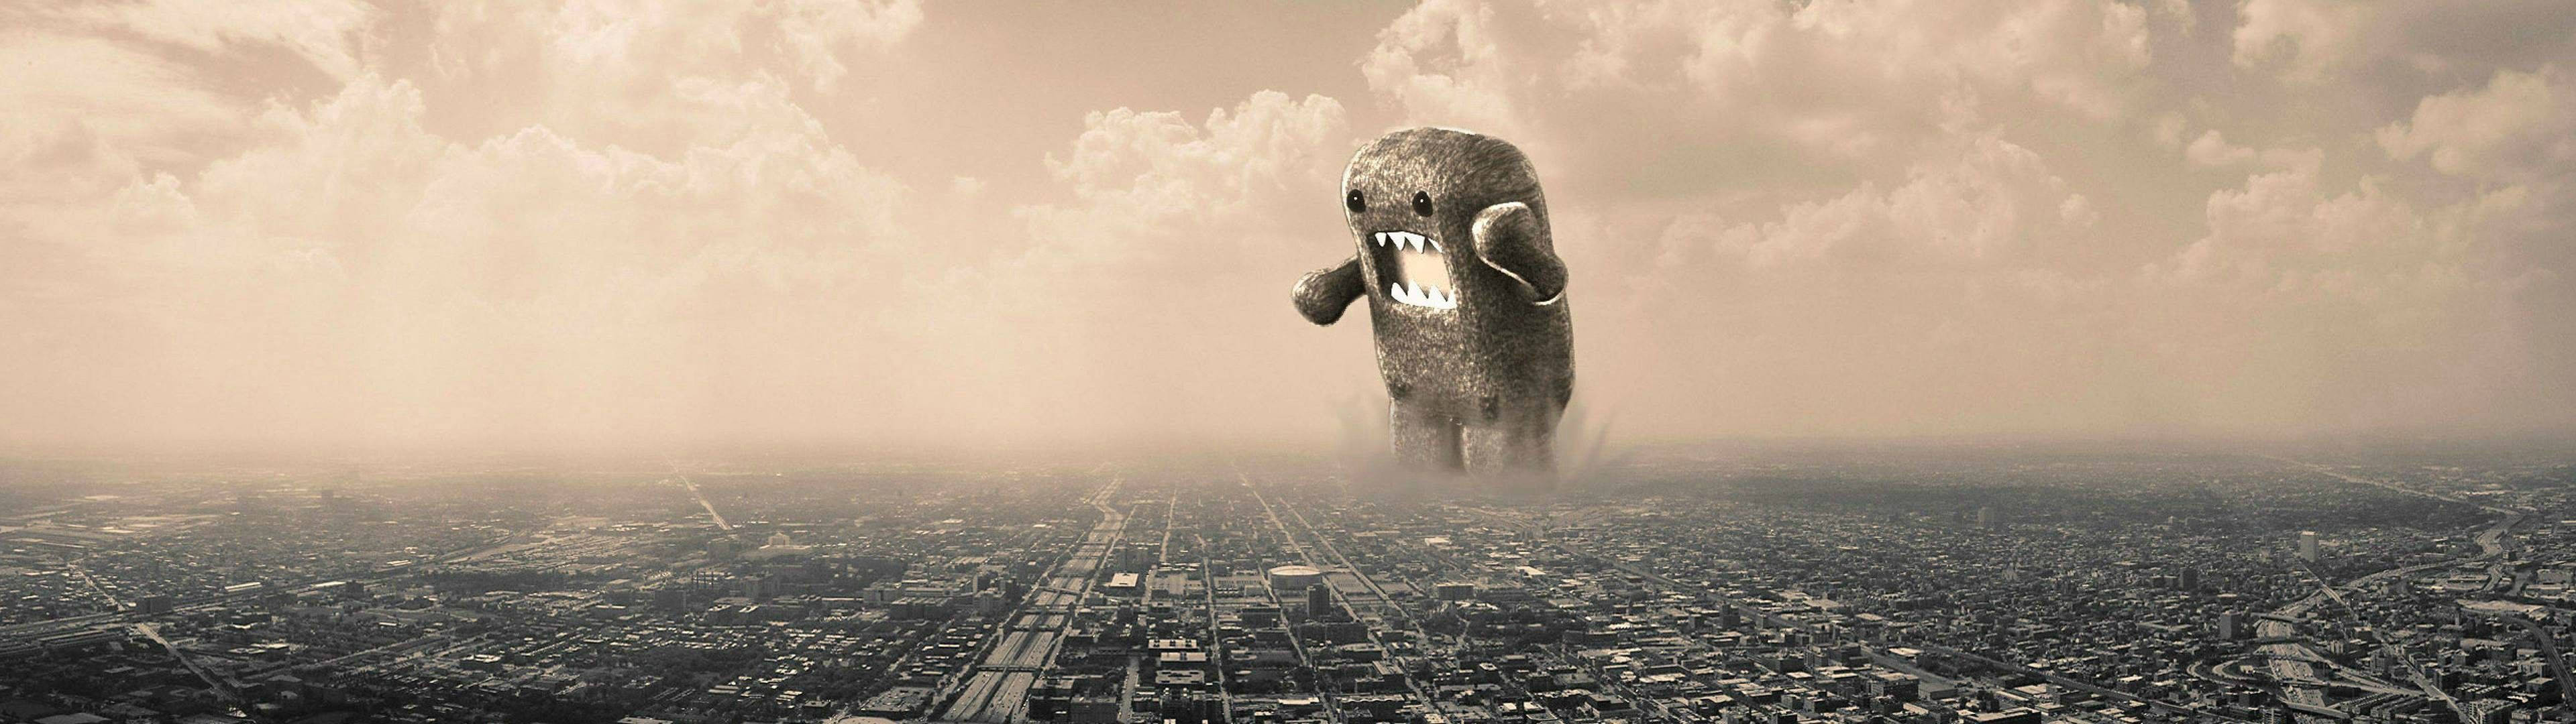 Domo Monster Welcomes You To The World Of Dual Monitor Wallpaper